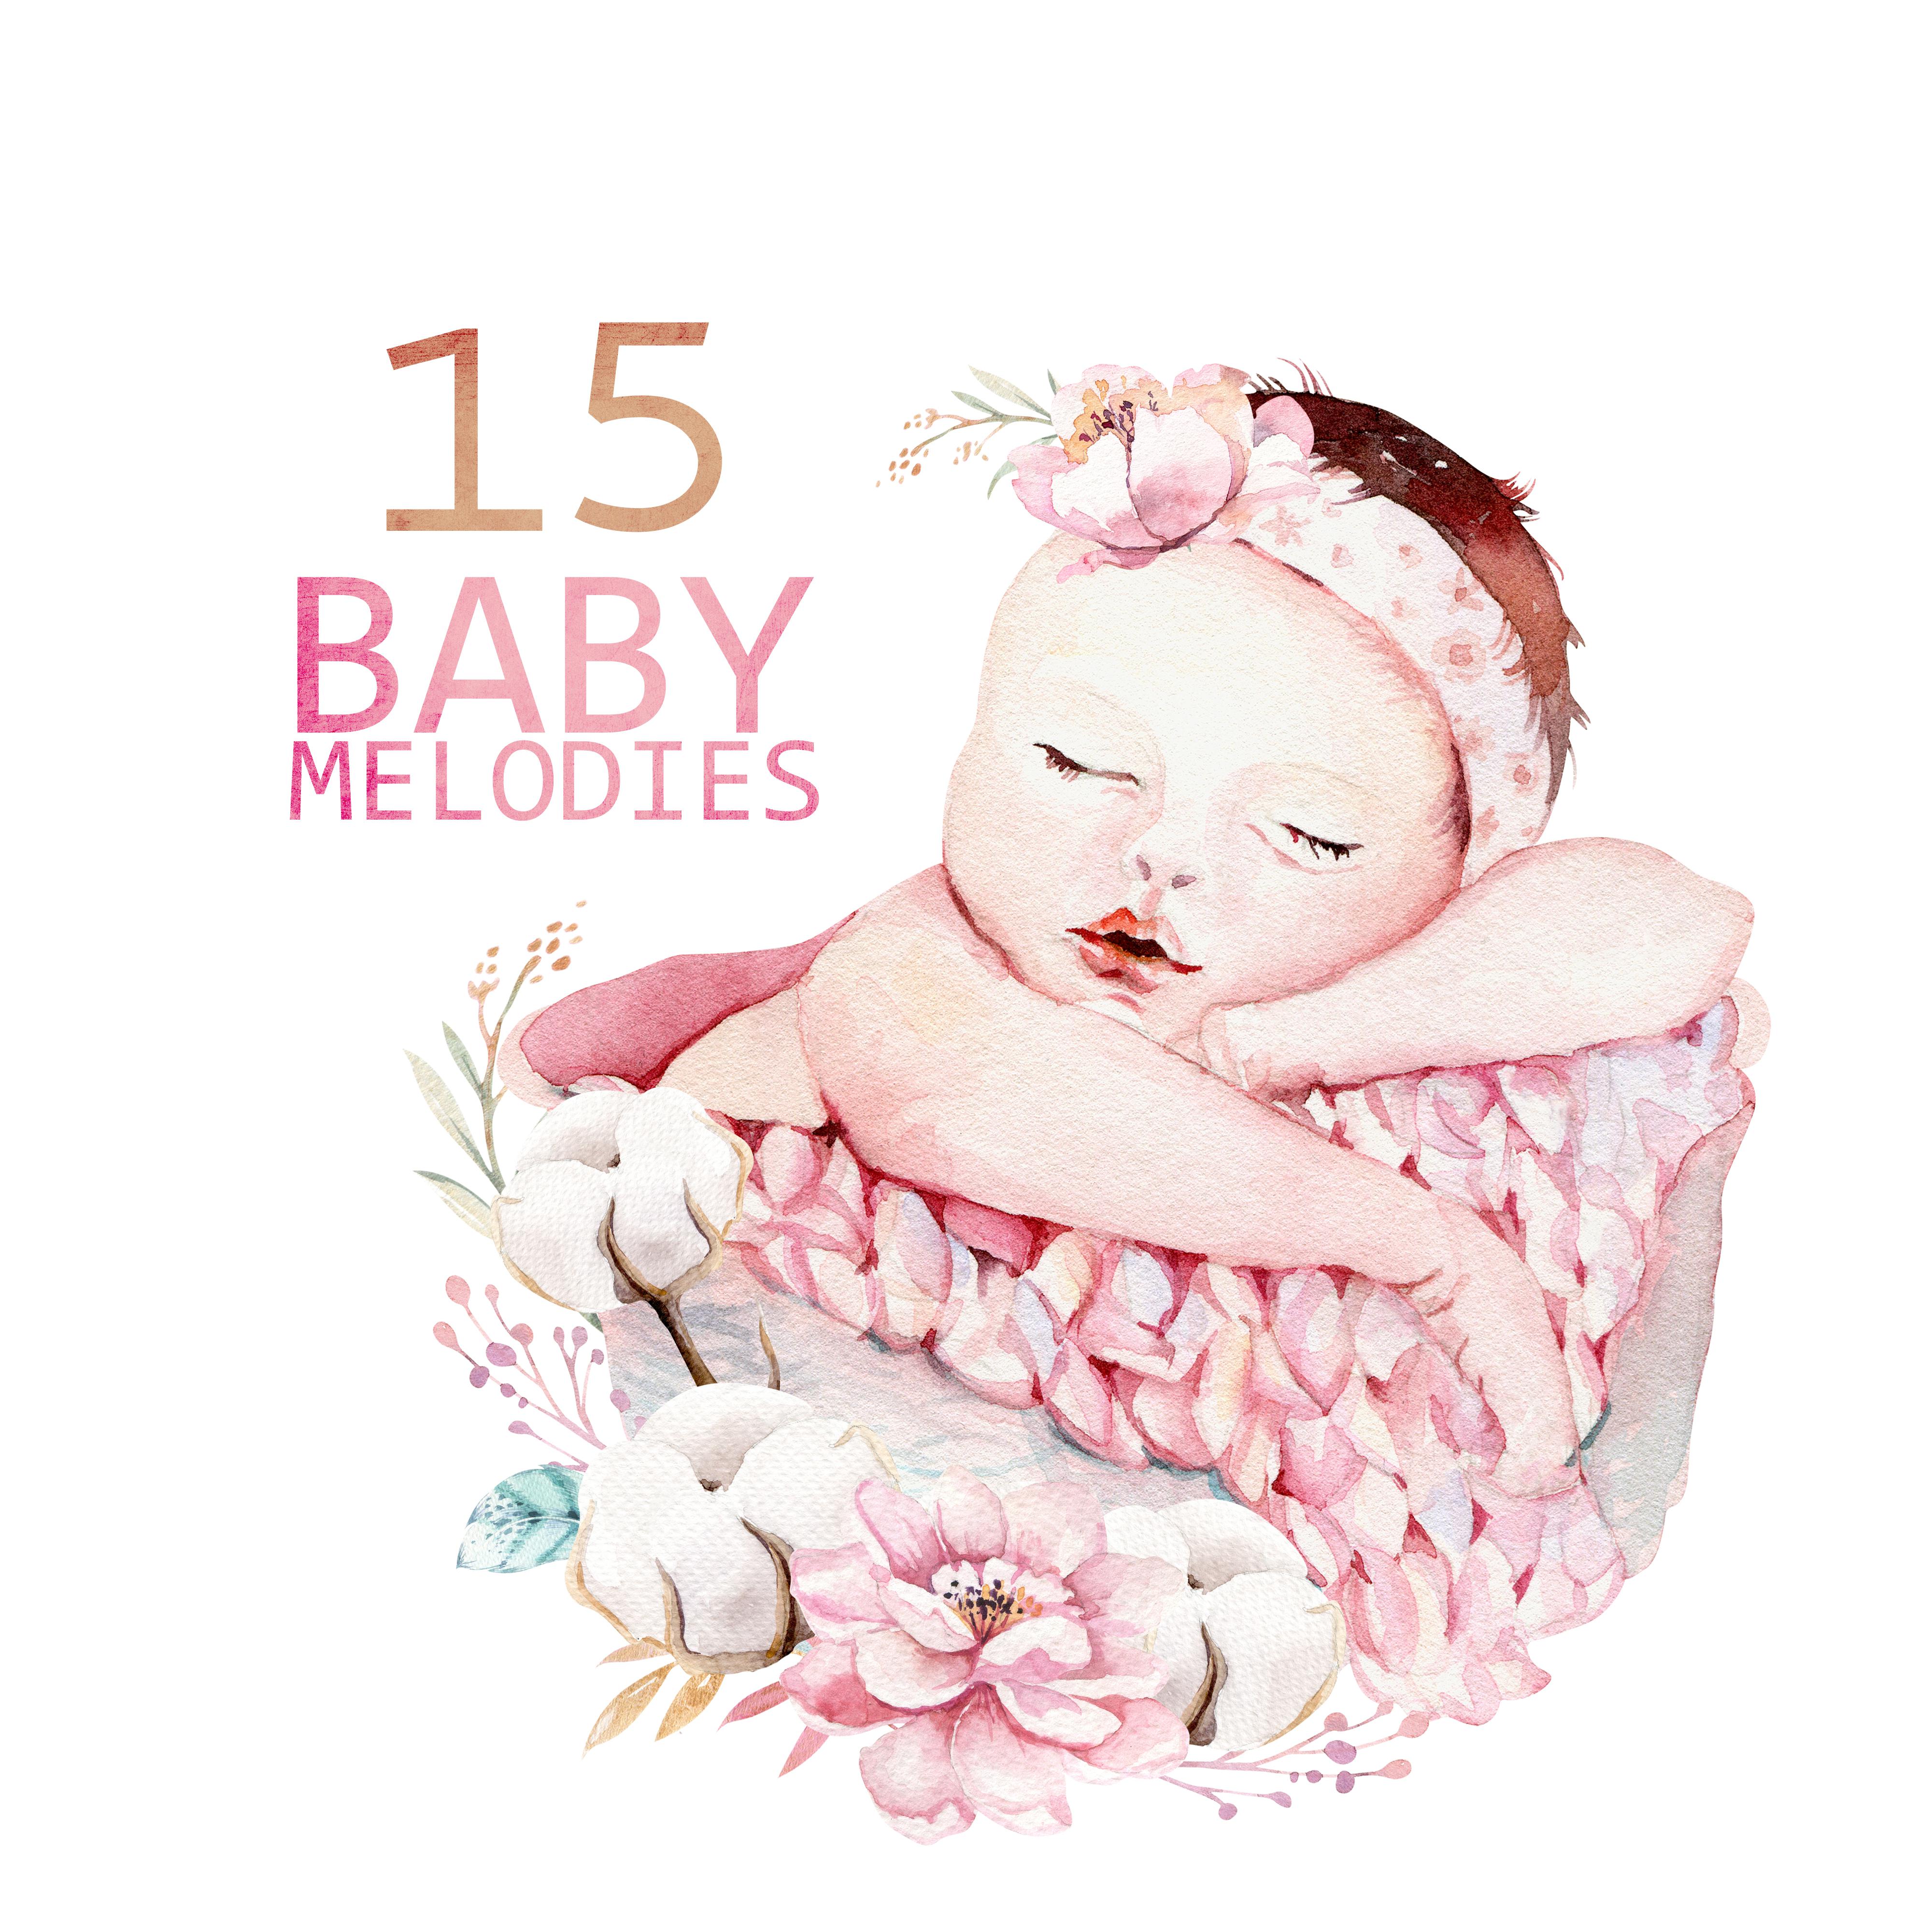 15 Baby Melodies: Peaceful Sounds for Kids, Bedtime Baby, Sweet Lullabies at Night, Cradle Songs, Calm Sleep, Relaxed Baby